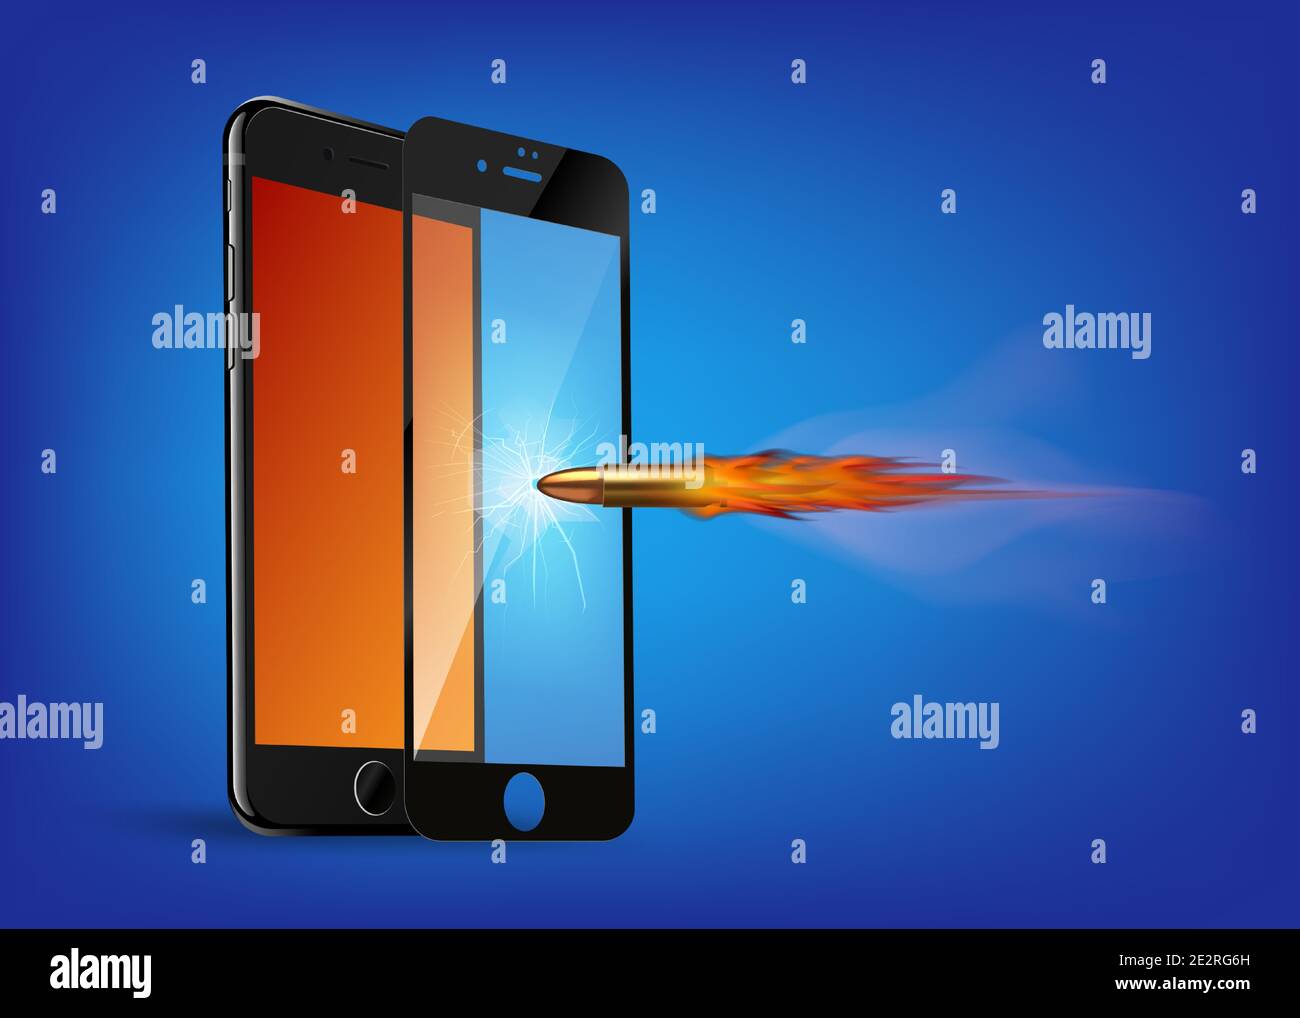 https://c8.alamy.com/comp/2E2RG6H/shot-a-bullet-in-protective-glass-a-crack-on-glass-vector-screen-protector-film-or-glass-cover-isolated-on-grey-background-mobile-accessory-2E2RG6H.jpg